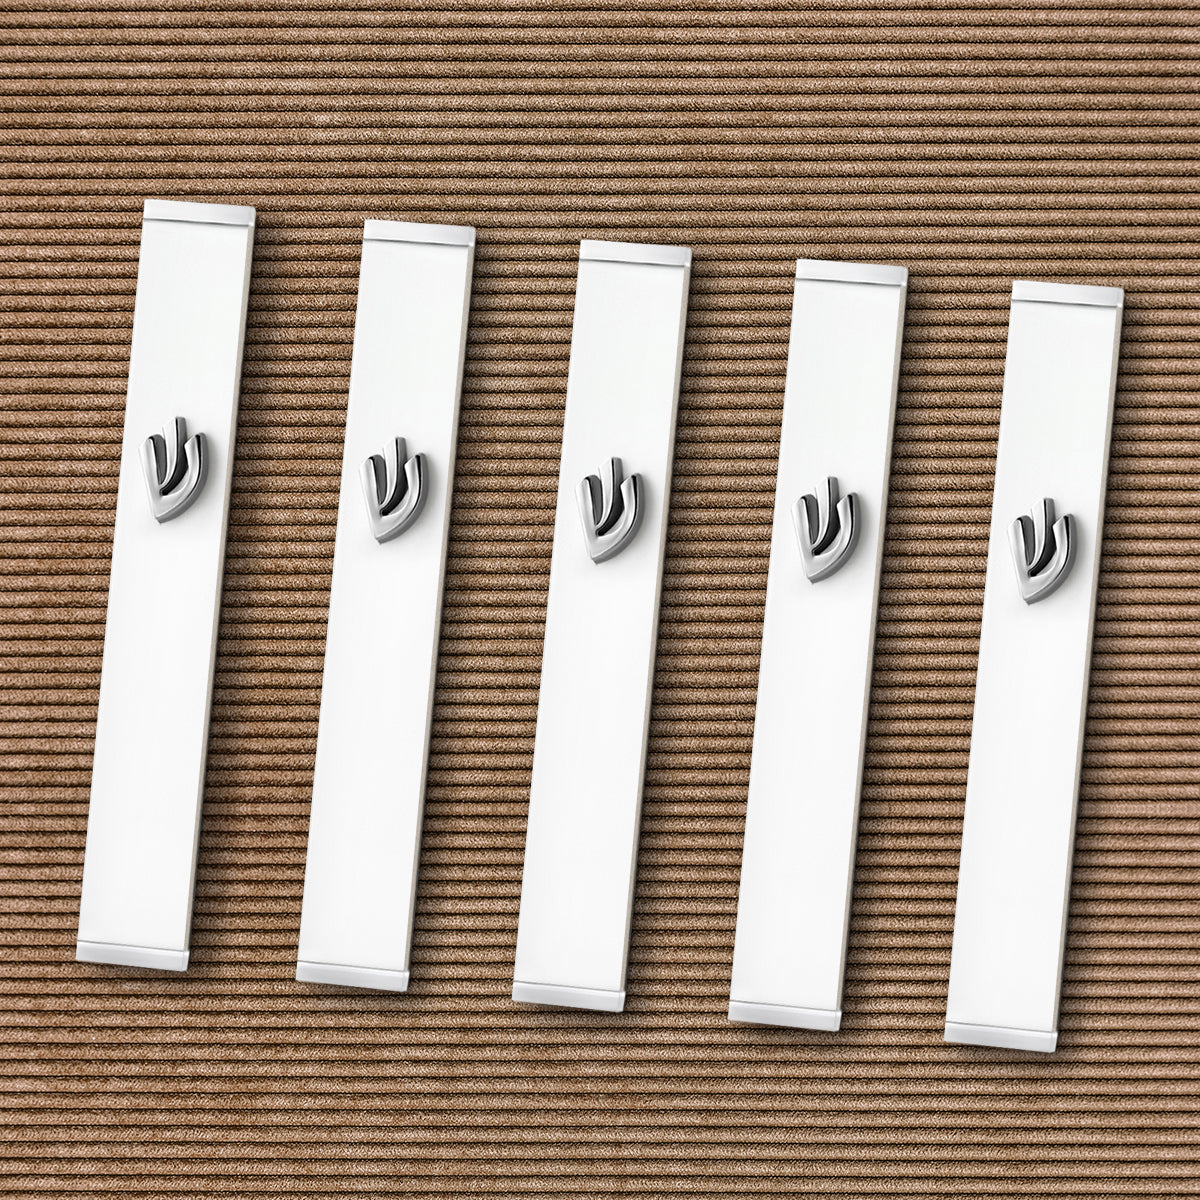 Set of White Mezuzah Cases - Candy